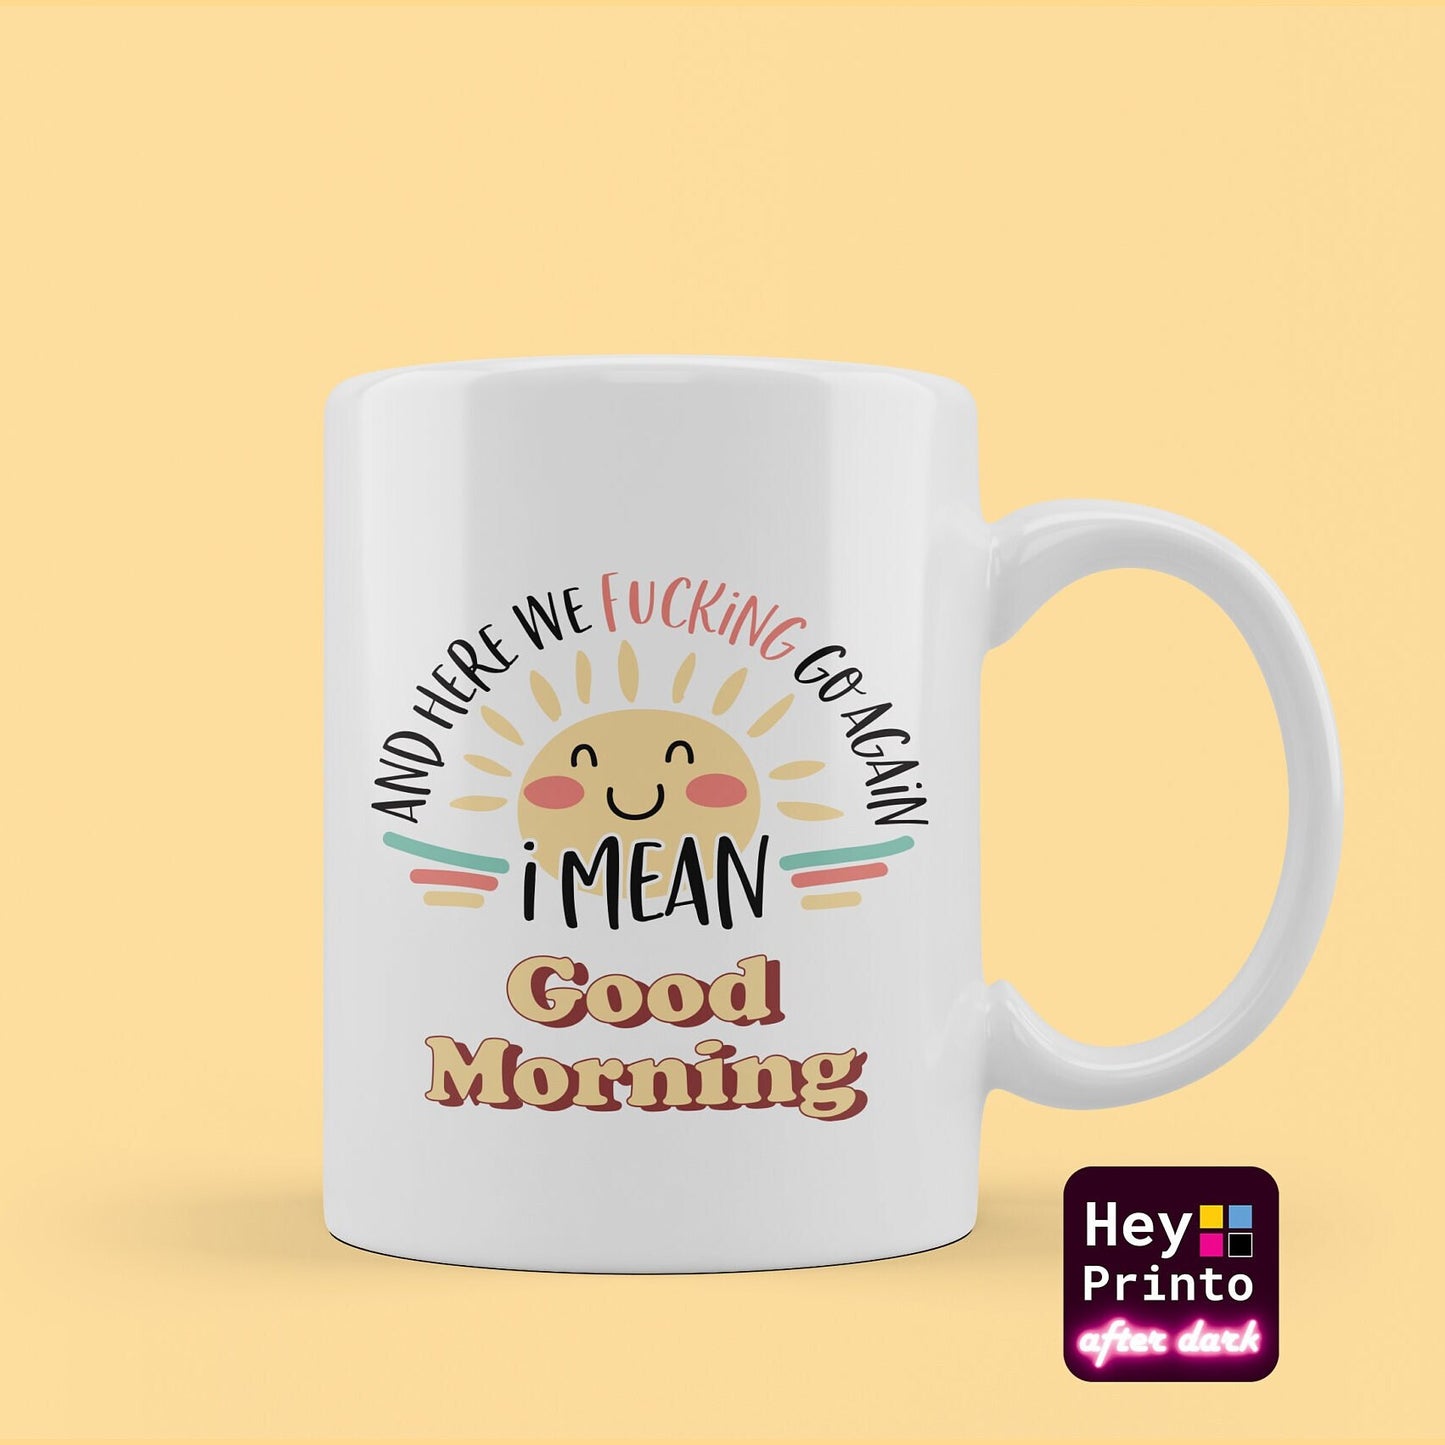 Good morning Coffee Cup, Rise and shine coffee cup mug, funny office mug gift for colleagues